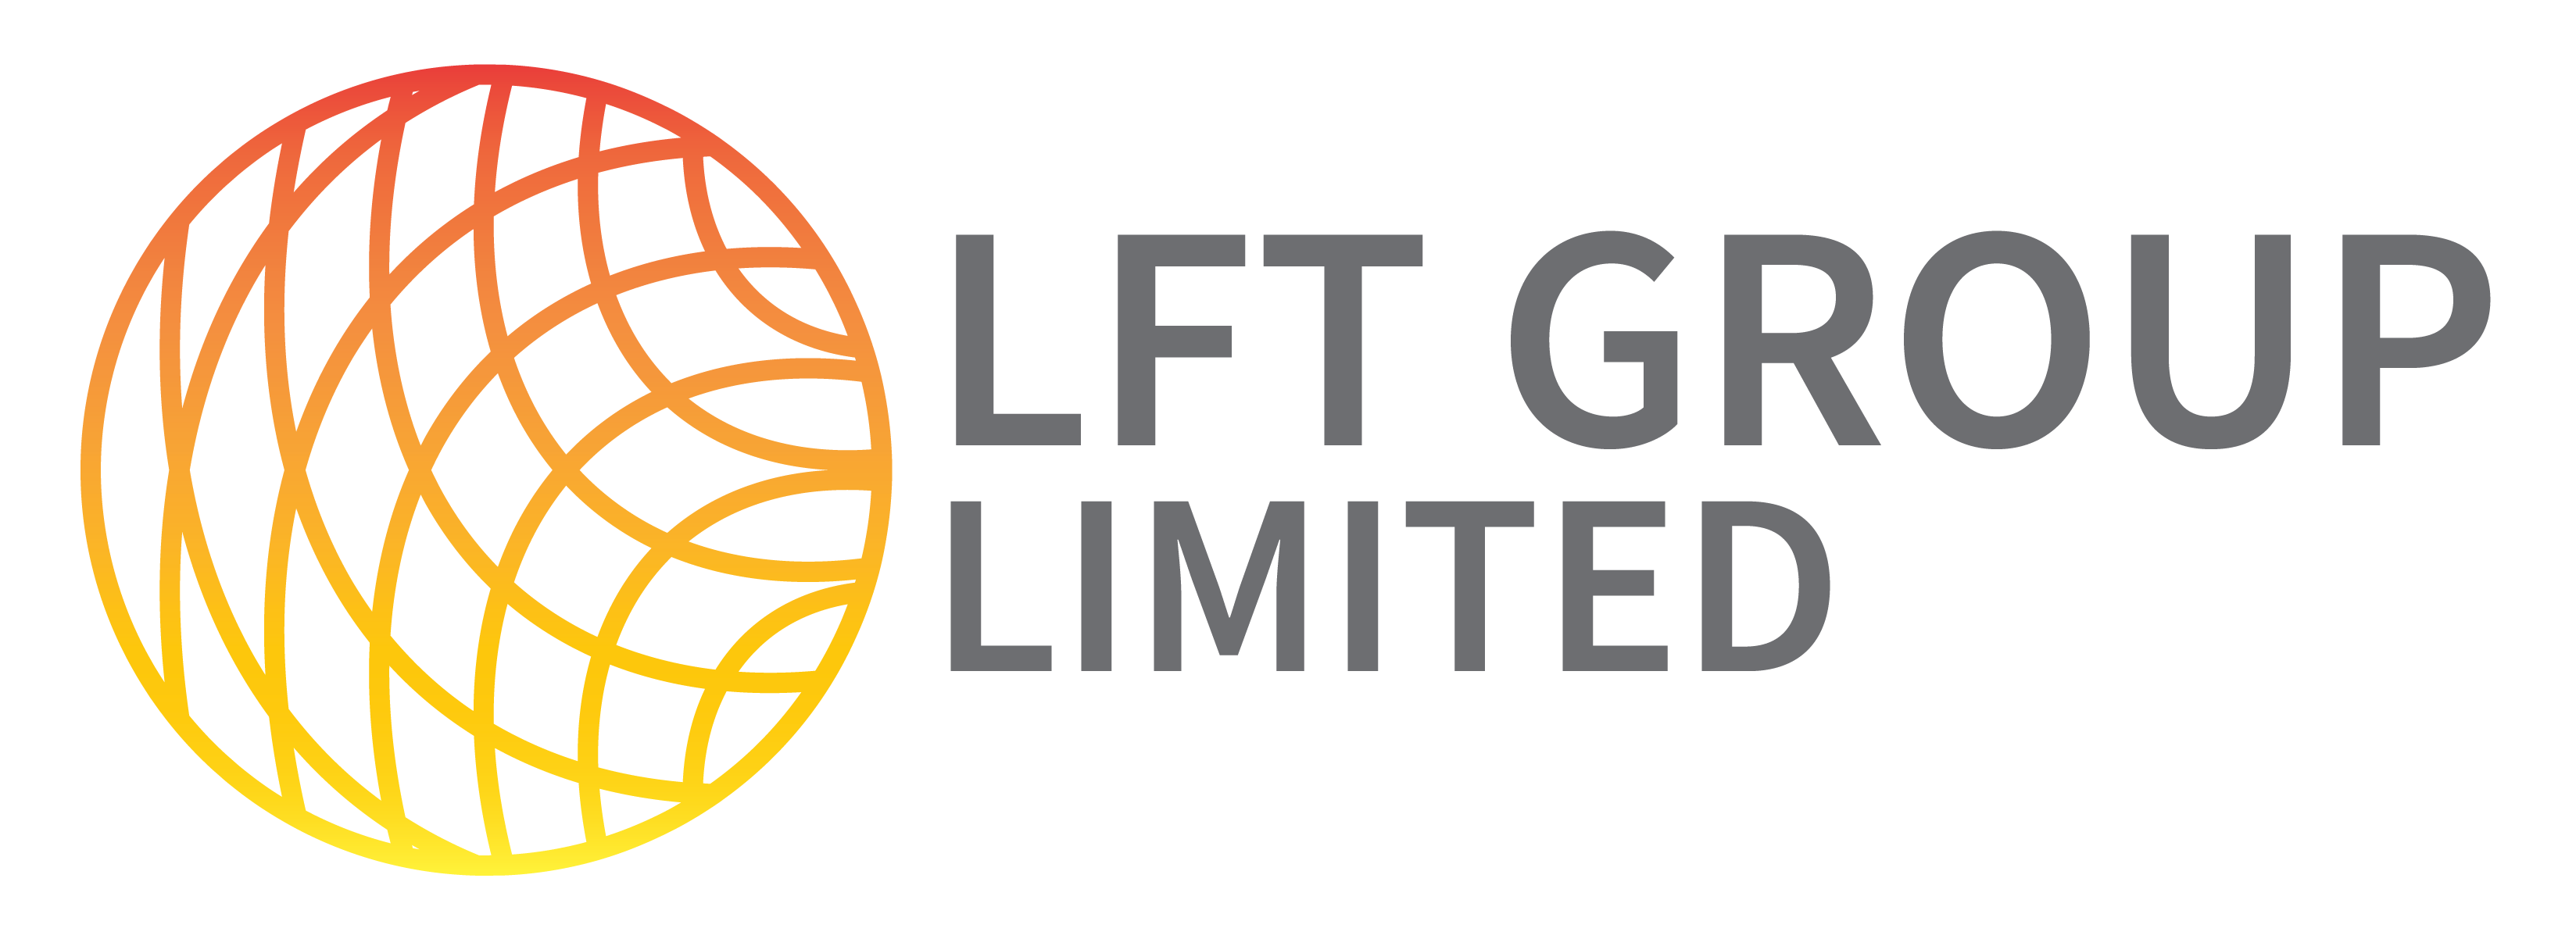 LFT Group Limited